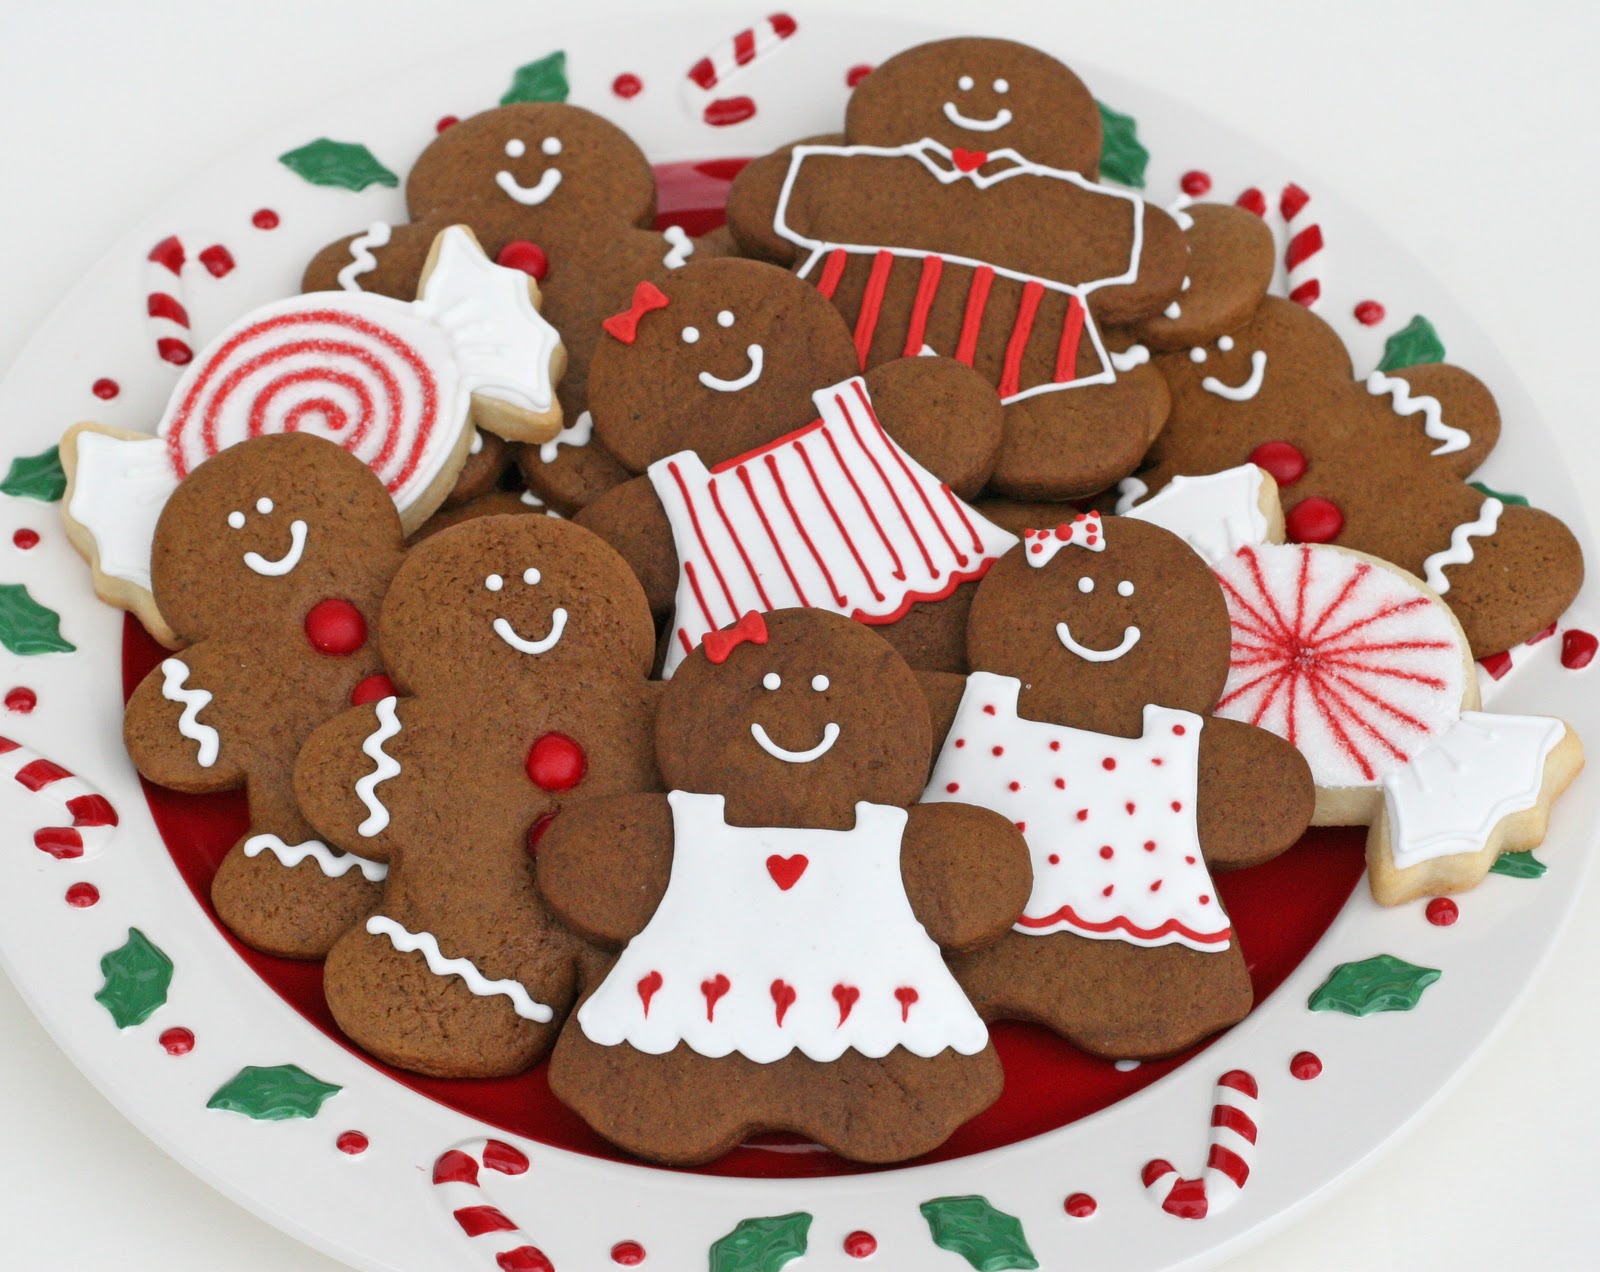 Christmas Cookies Decorating Ideas Pictures / Holiday Sugar Cookies